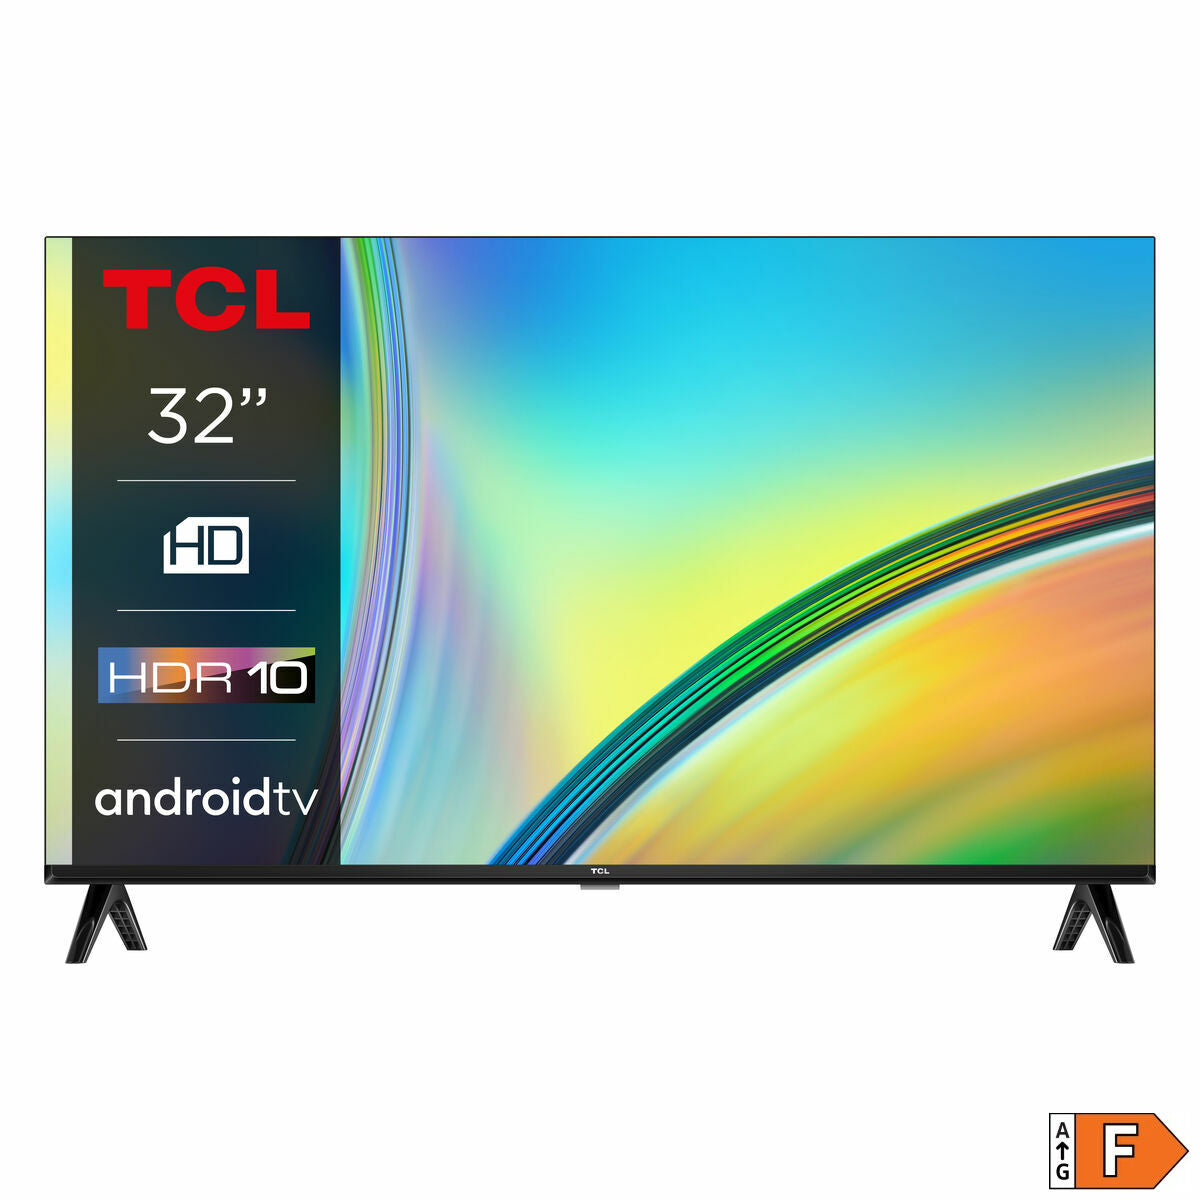 Smart TV TCL 32S5400A HD 32" LED, TCL, Electronics, TV, Video and home cinema, smart-tv-tcl-32s5400a-hd-32-led, Brand_TCL, category-reference-2609, category-reference-2625, category-reference-2931, category-reference-t-18805, category-reference-t-18827, category-reference-t-19653, cinema and television, Condition_NEW, entertainment, Price_100 - 200, RiotNook